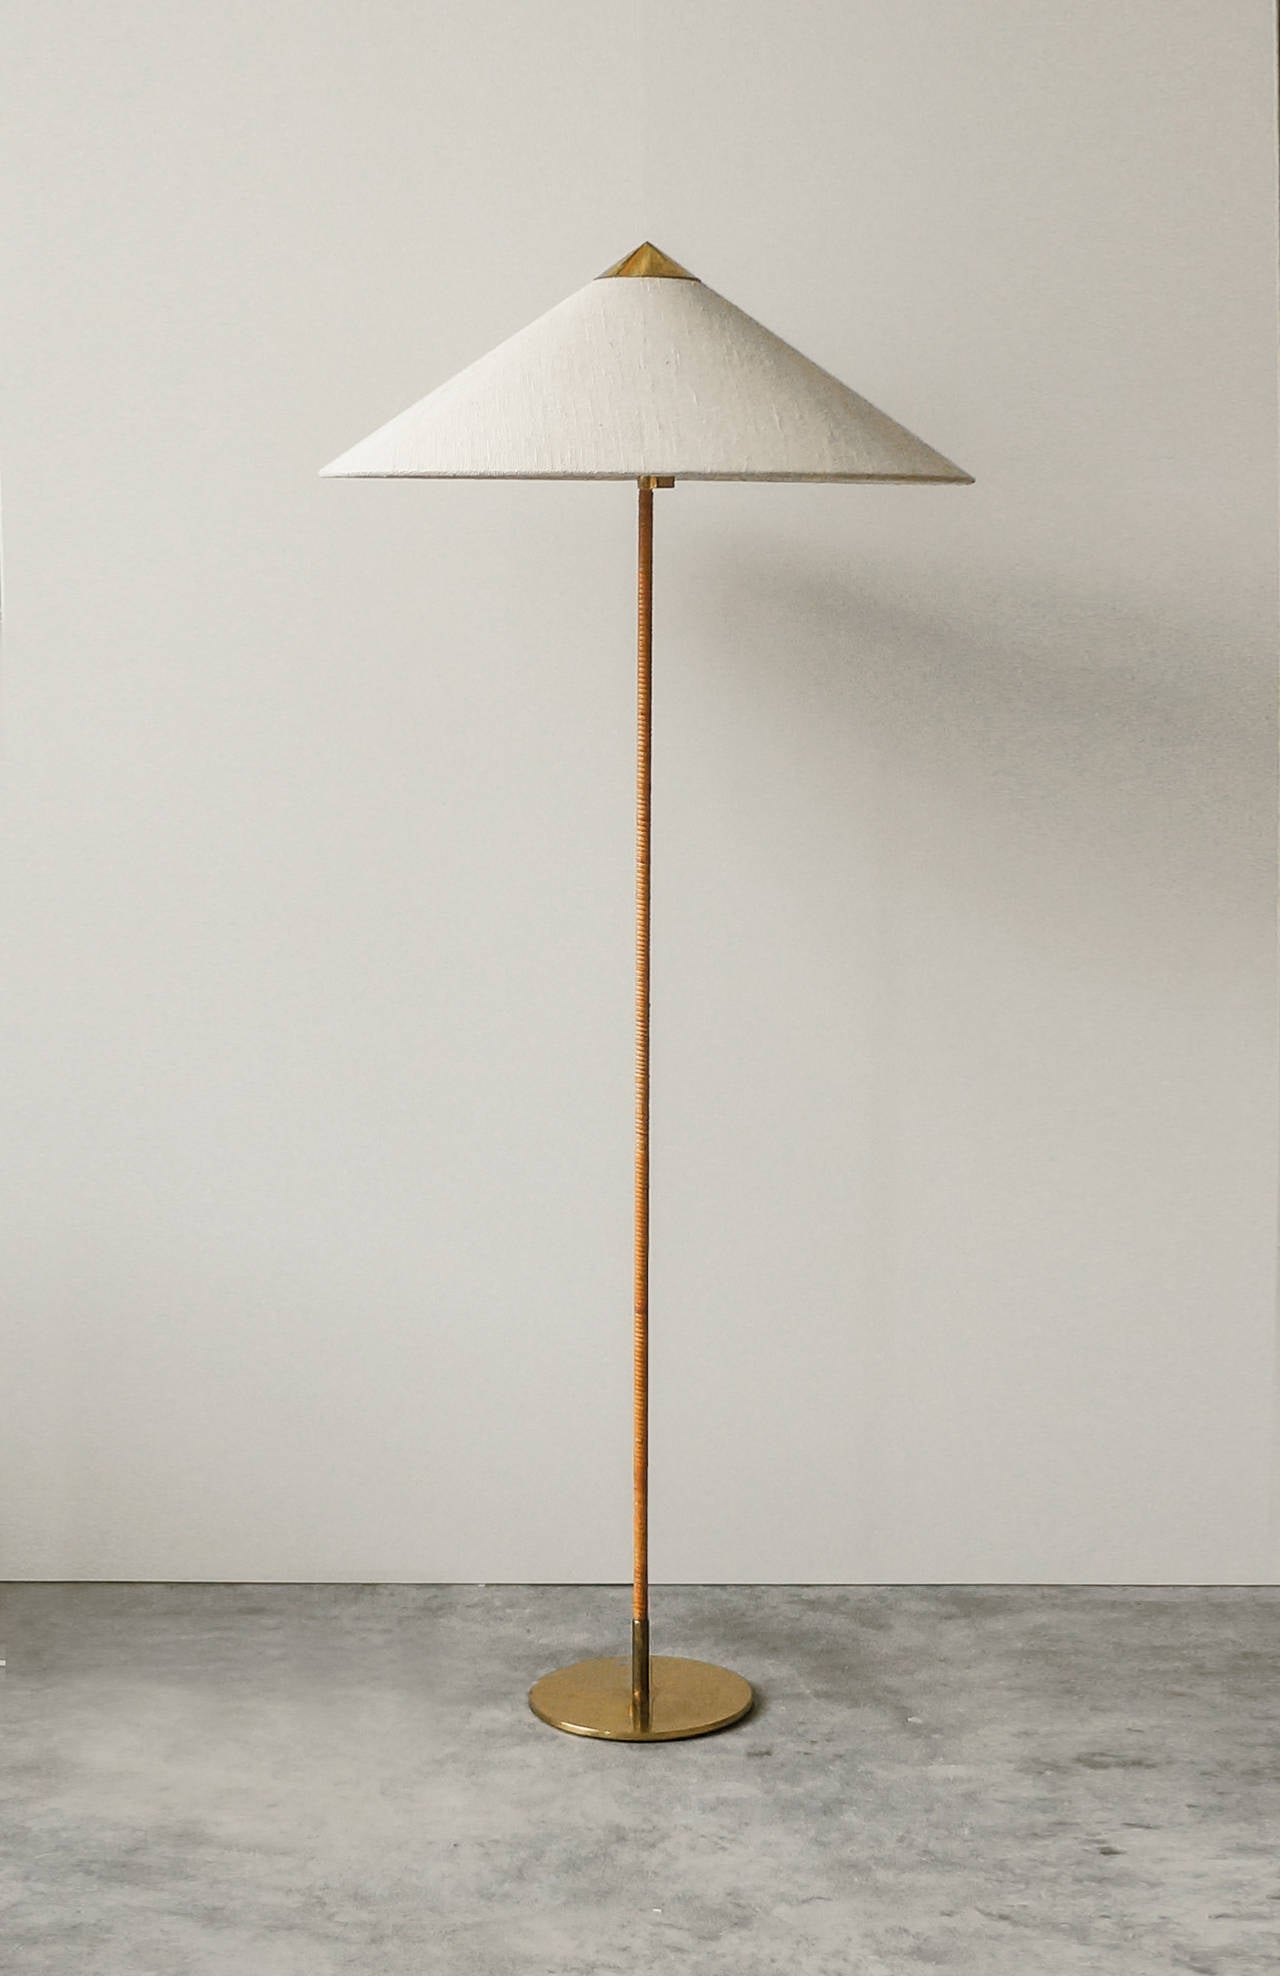 Paavo Tynell Floor lamp.

Taito Oy.
Finland, circa 1940s.
Solid brass, metal, rattan, wool shade.
Measures: 24 diameter x 60 H inches.

Model no. 9602, designed and manufactured, circa 1940s. Manufactured by Taito Oy, Finland.